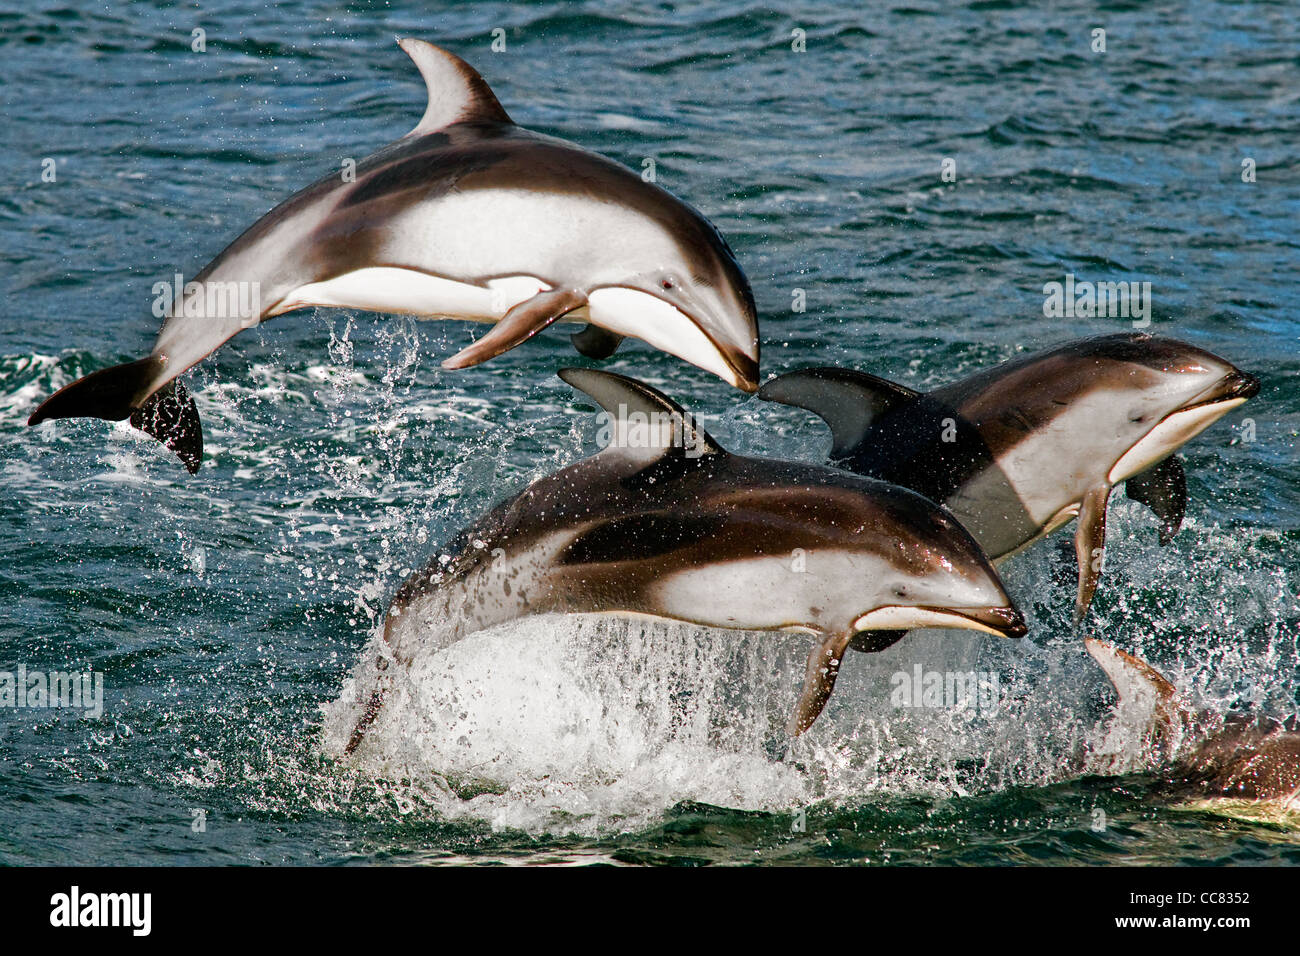 Pacific White-sided Dolphins (Lagenorhynchus obliquidens / longidens / ognevi) jumping in the North Pacific Ocean, Canada Stock Photo